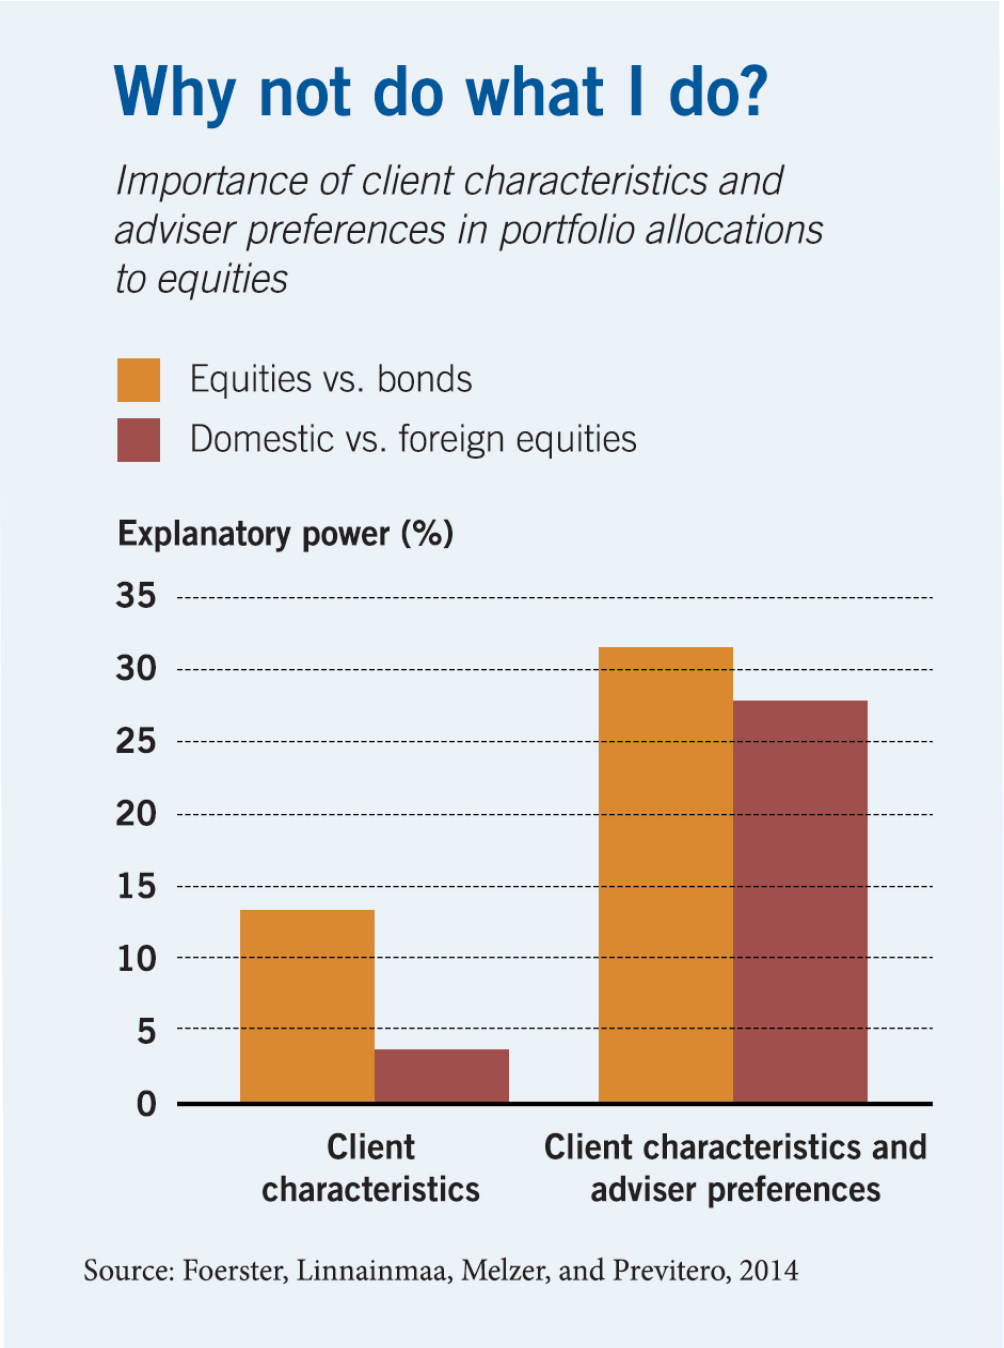 A bar chart with percentages on the y-axis and categories on the x-axis showing that client characteristics explain thirteen percent of portfolio allocations to equities versus bonds, and four percent of allocations to domestic versus foreign equities. A second set of bars combines client characteristics and advise preferences, which explain thirty-one percent of equity allocations and twenty-eight percent of domestic allocations.